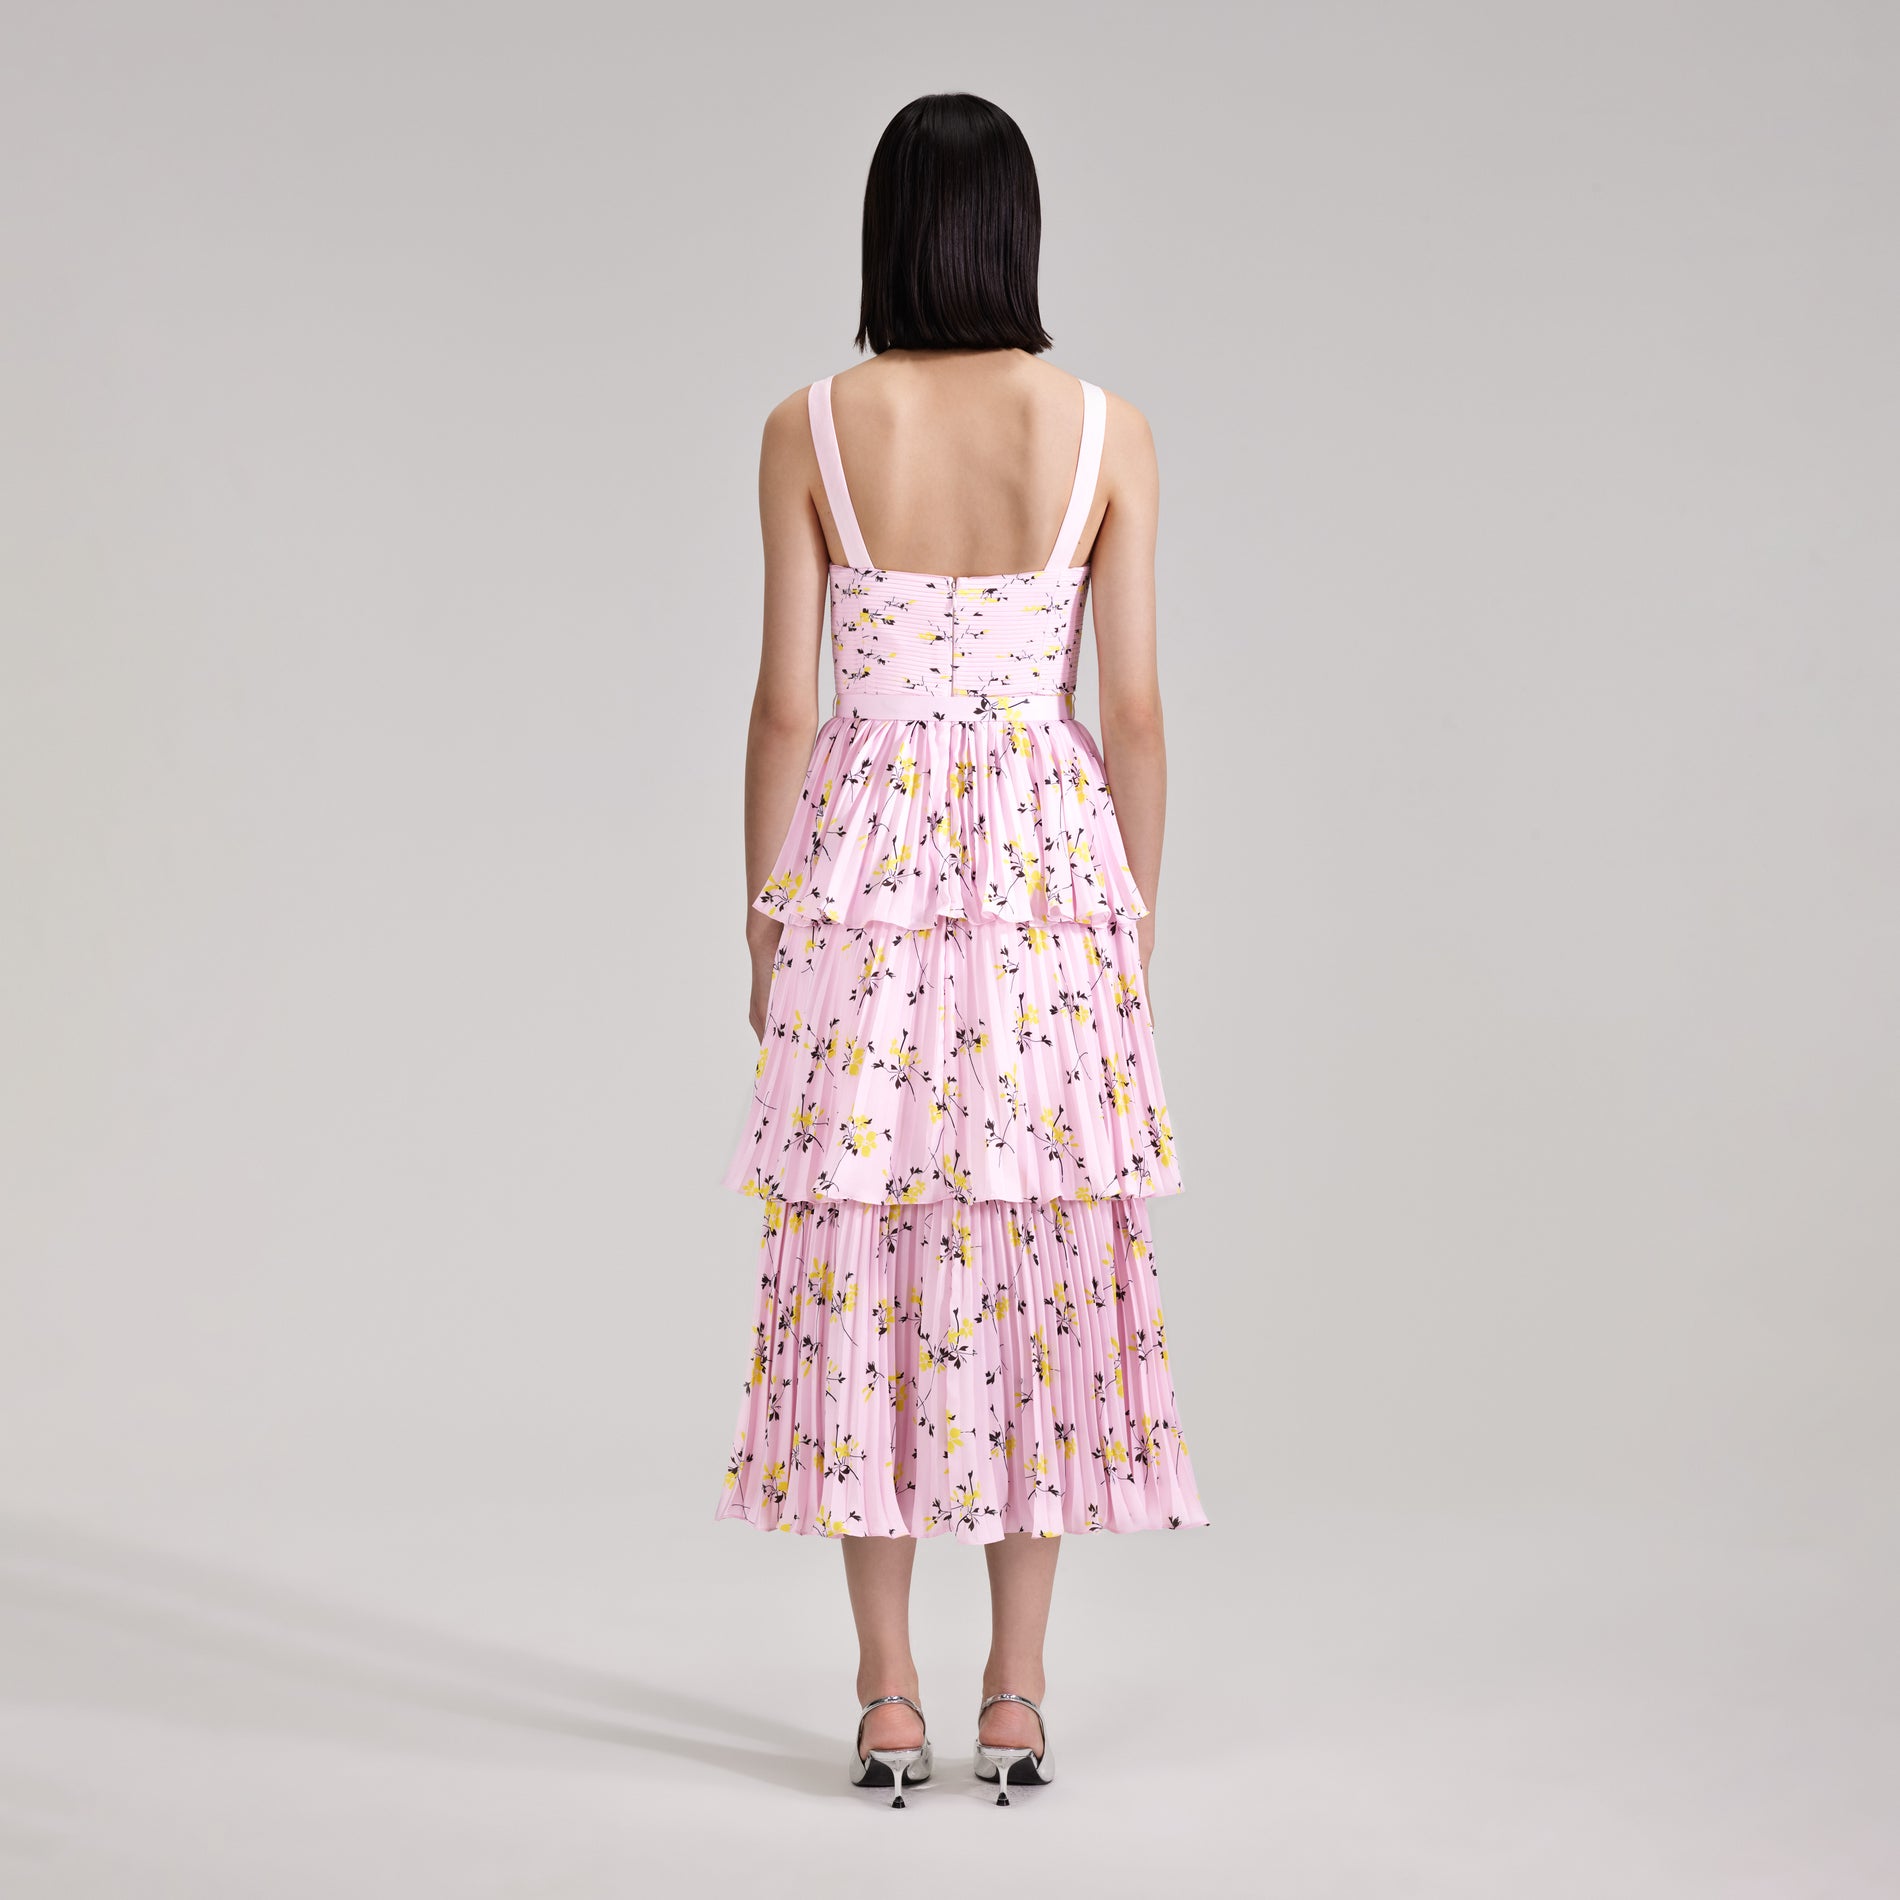 A woman wearing the Pink Floral Print Tiered Midi Dress